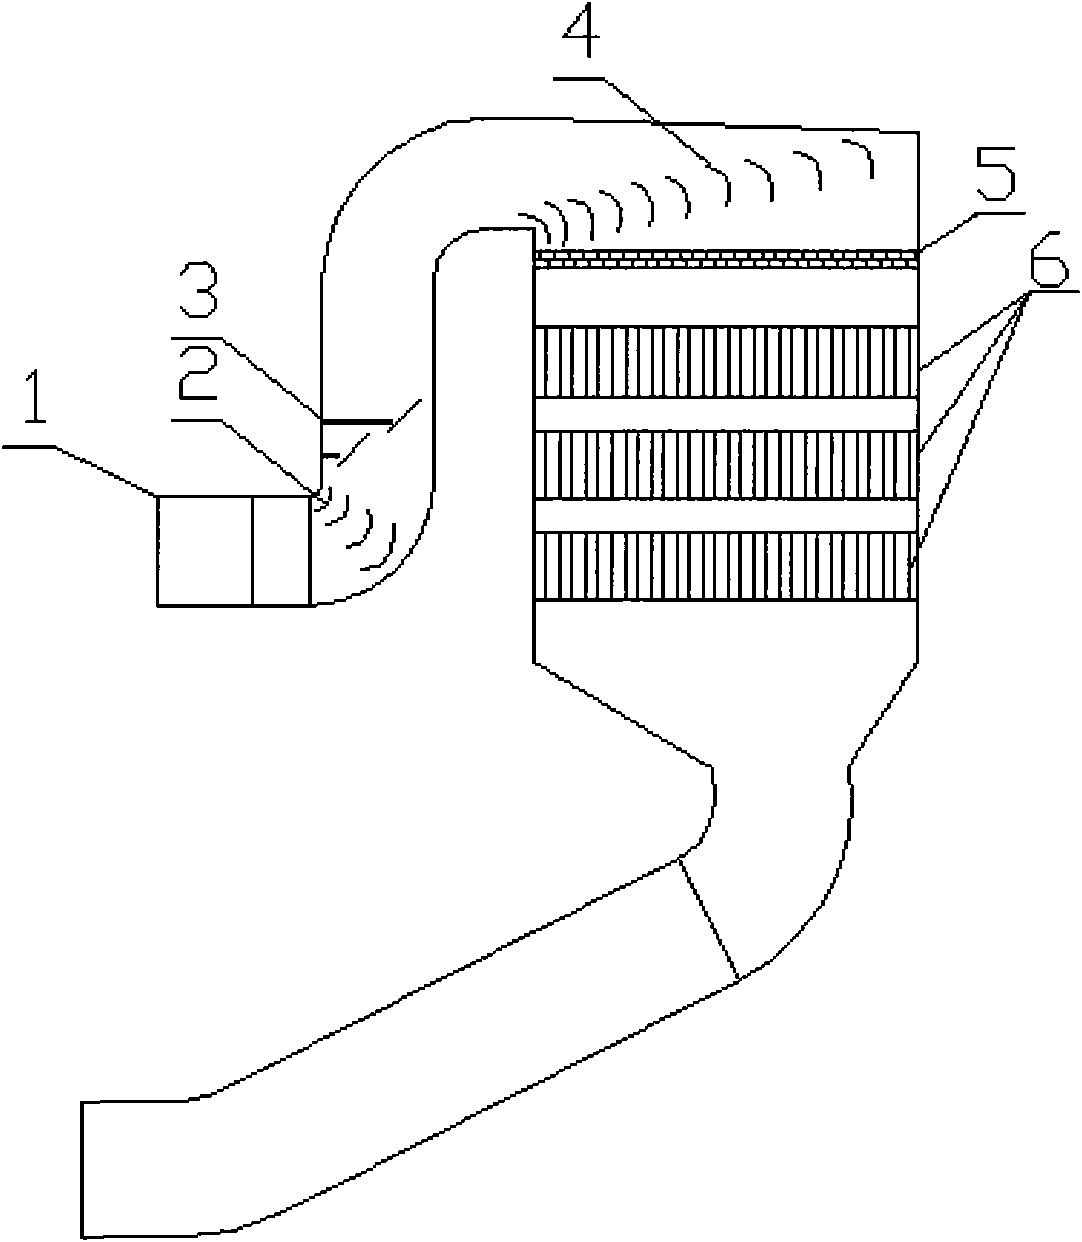 Cascading type rectifier used for SCR denitration device